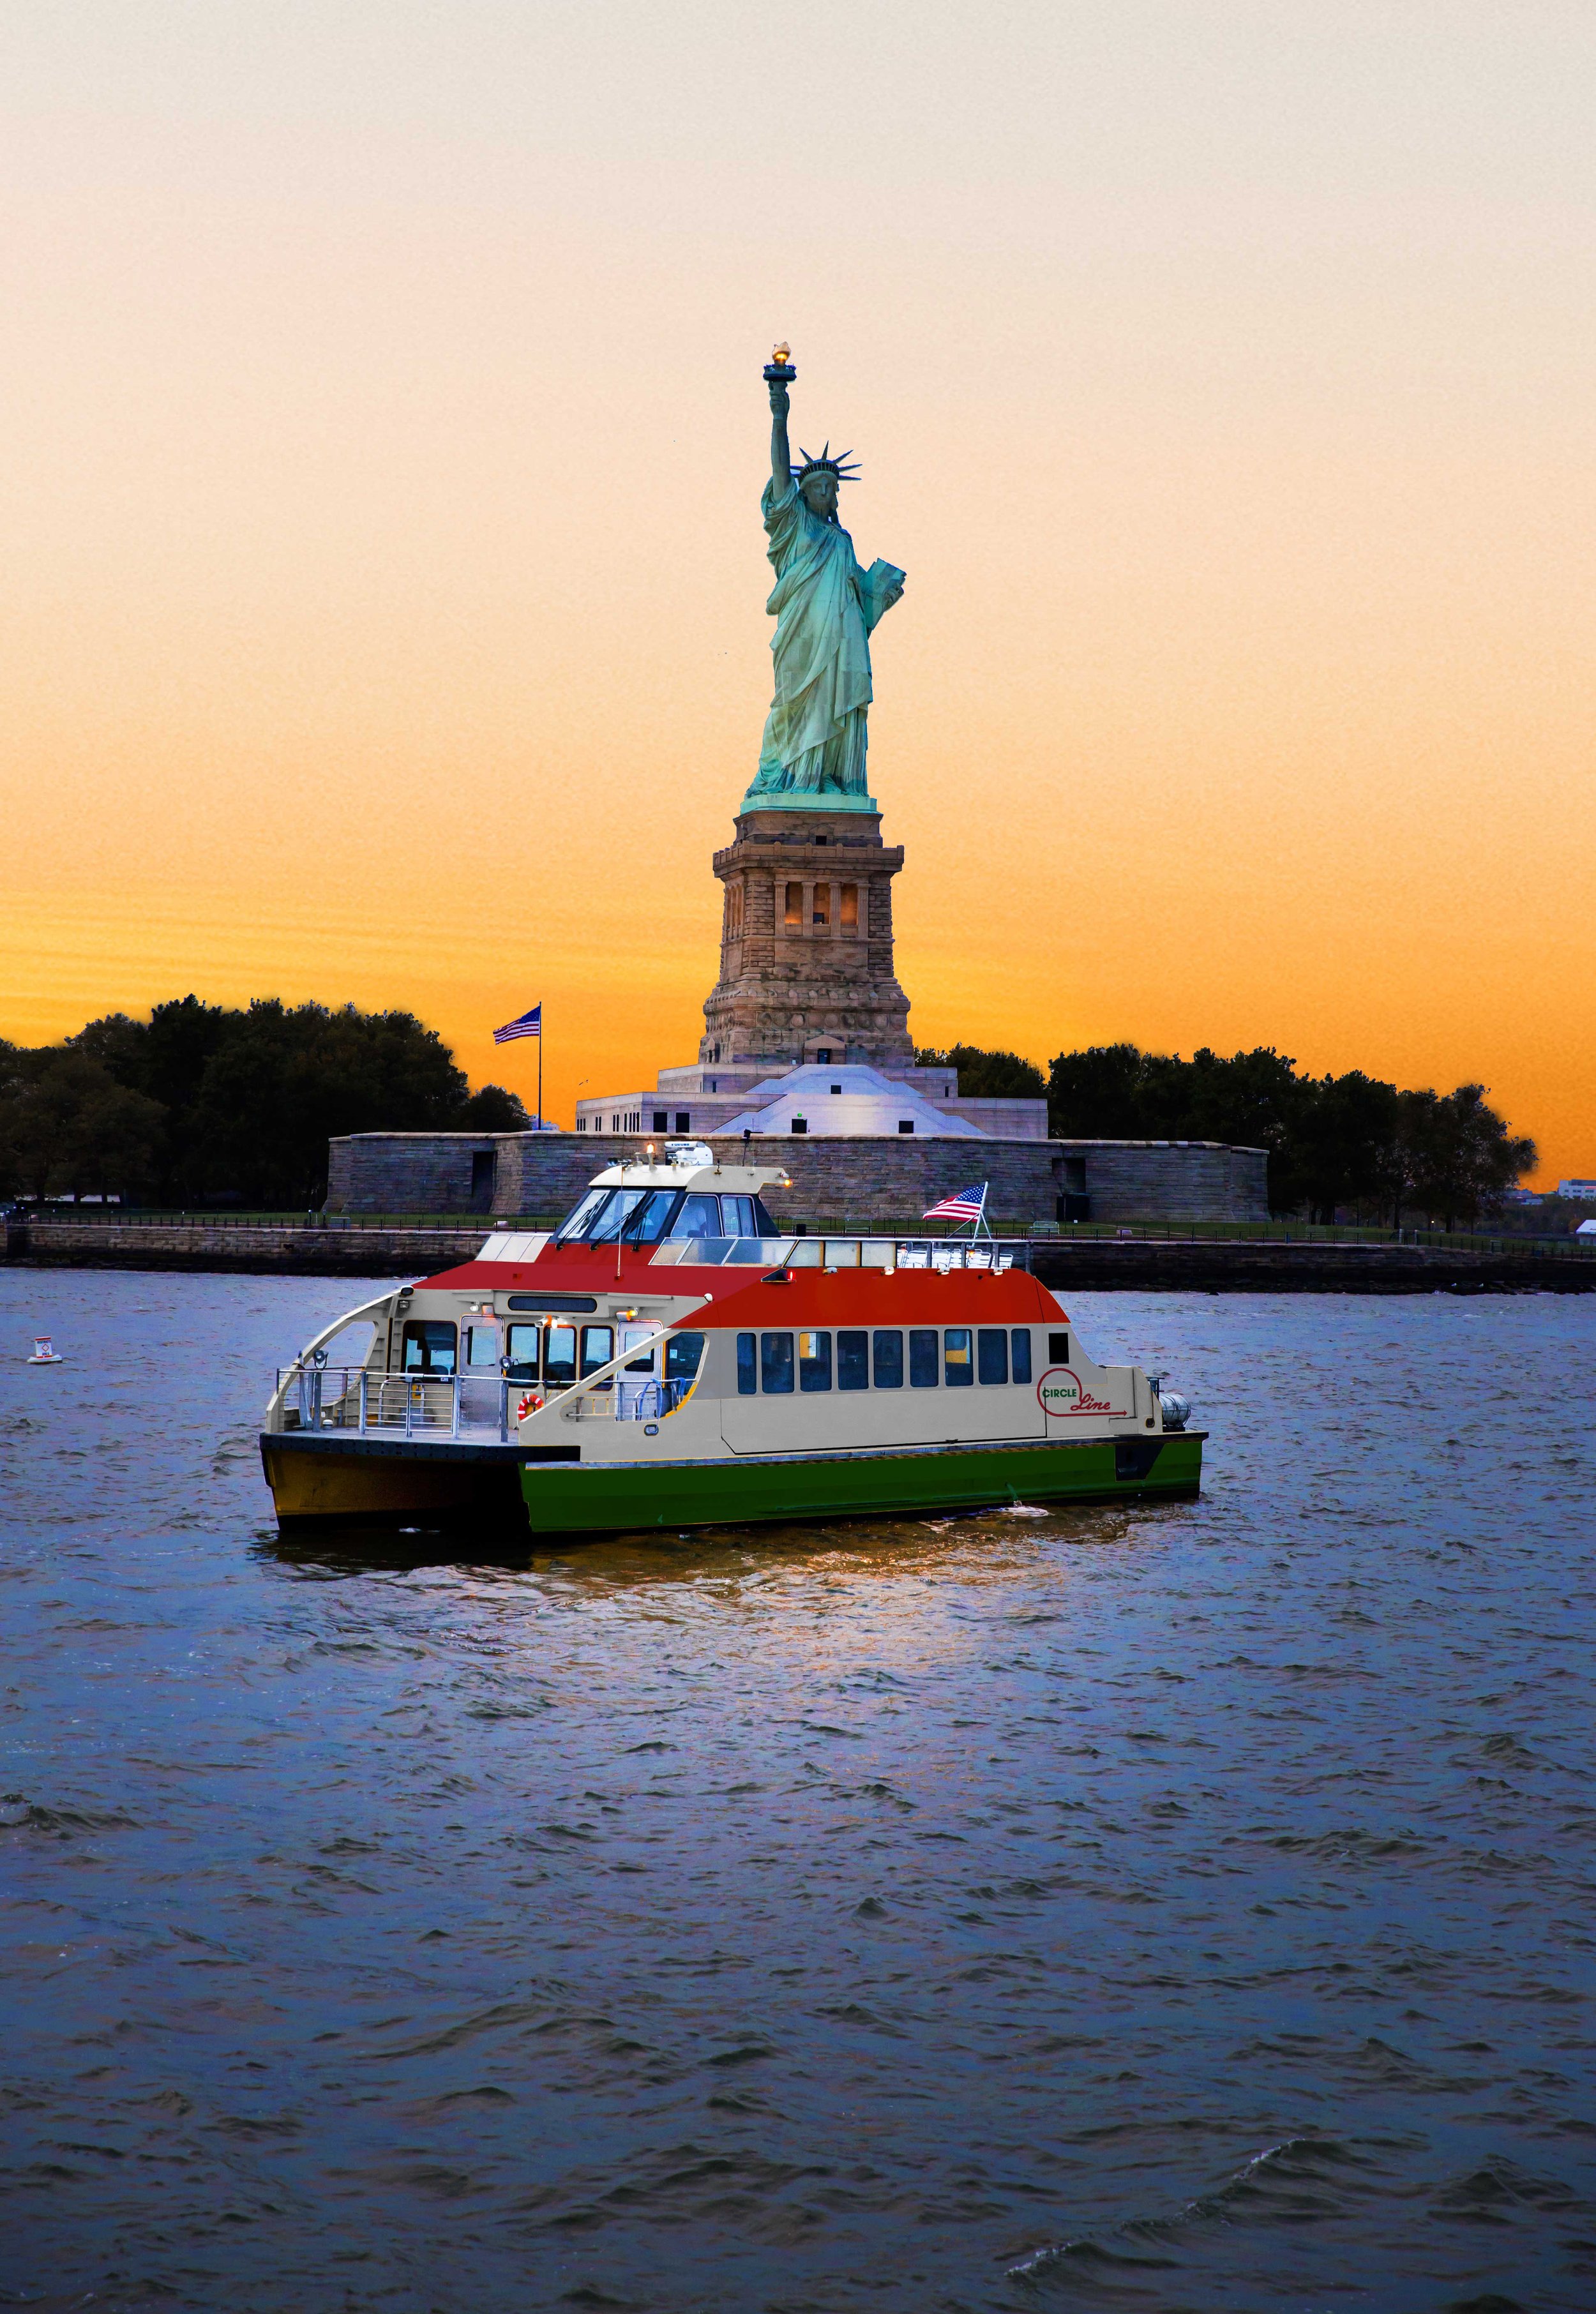 Circle LIne Statue at Sunset with Boat Close Up.jpg